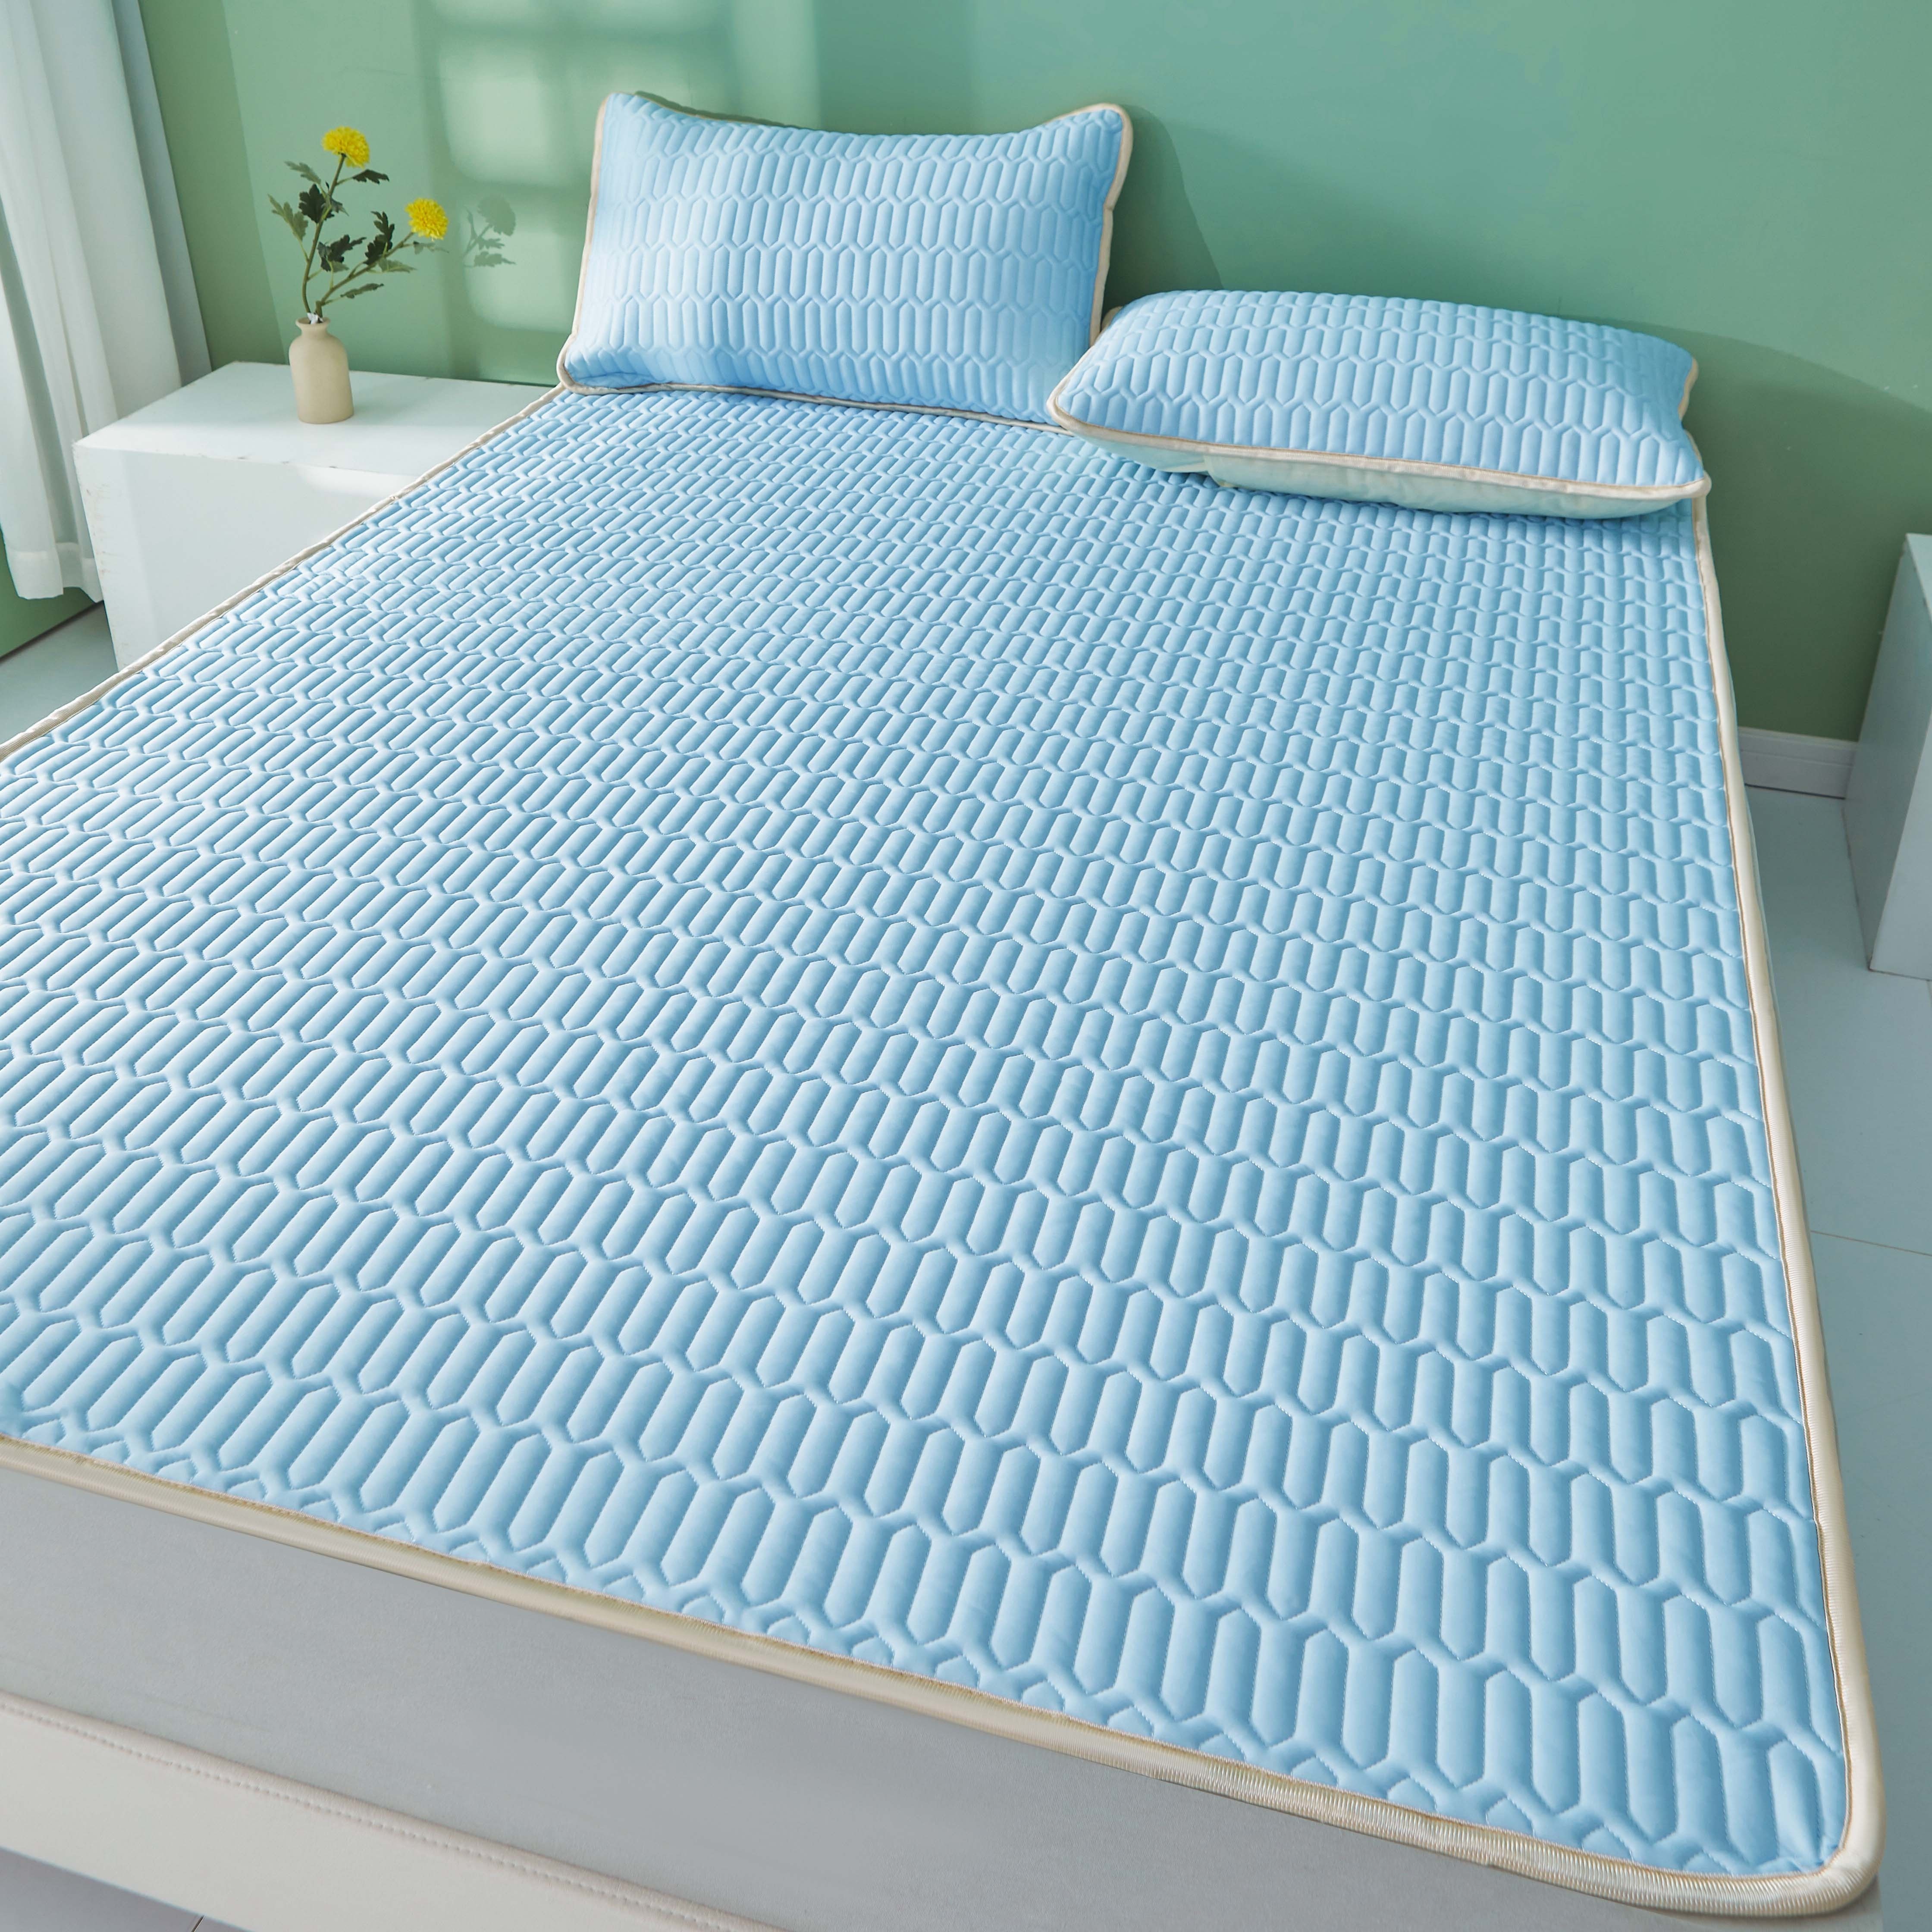 

1pc Solid Color Latex Mat, Pillowcase Pillow Insert Not Included, Cool And Skin-friendly And Comfortable, Summer Washable, Suitable For Bedroom And Bedroom Students, Light Blue